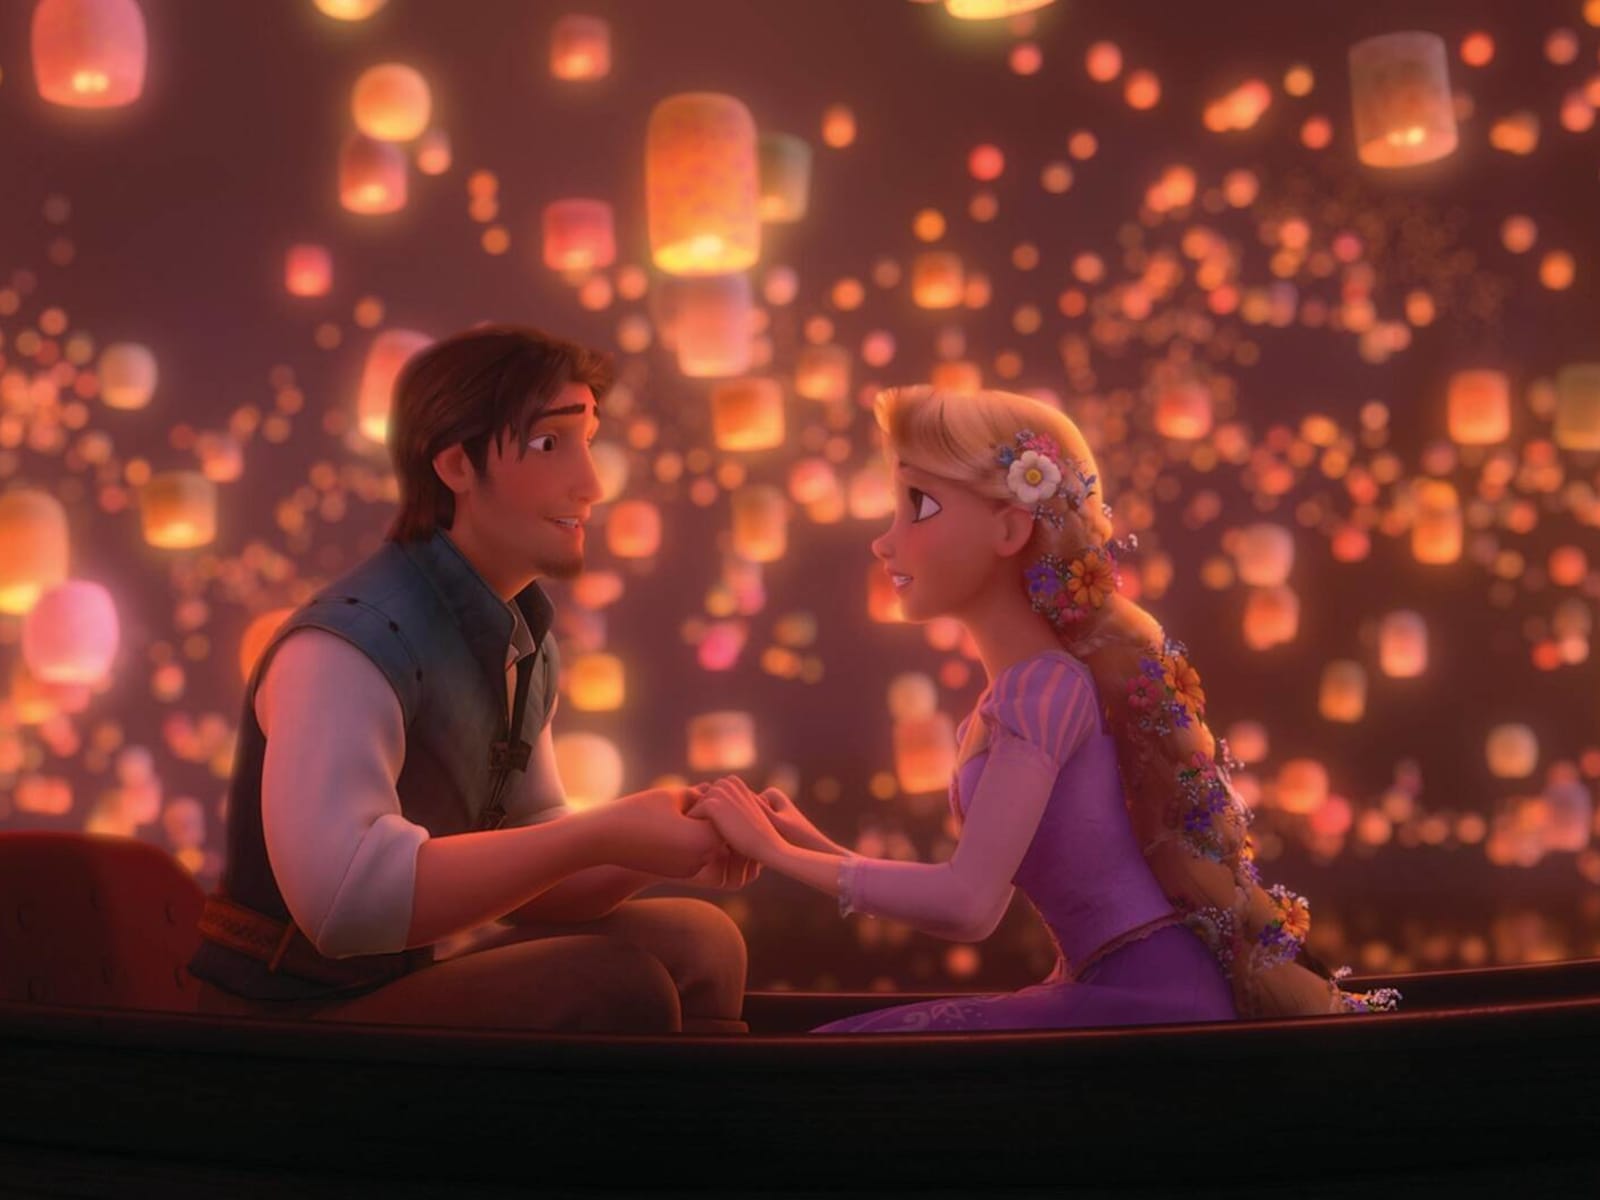 20 facts you might not know about 'Tangled